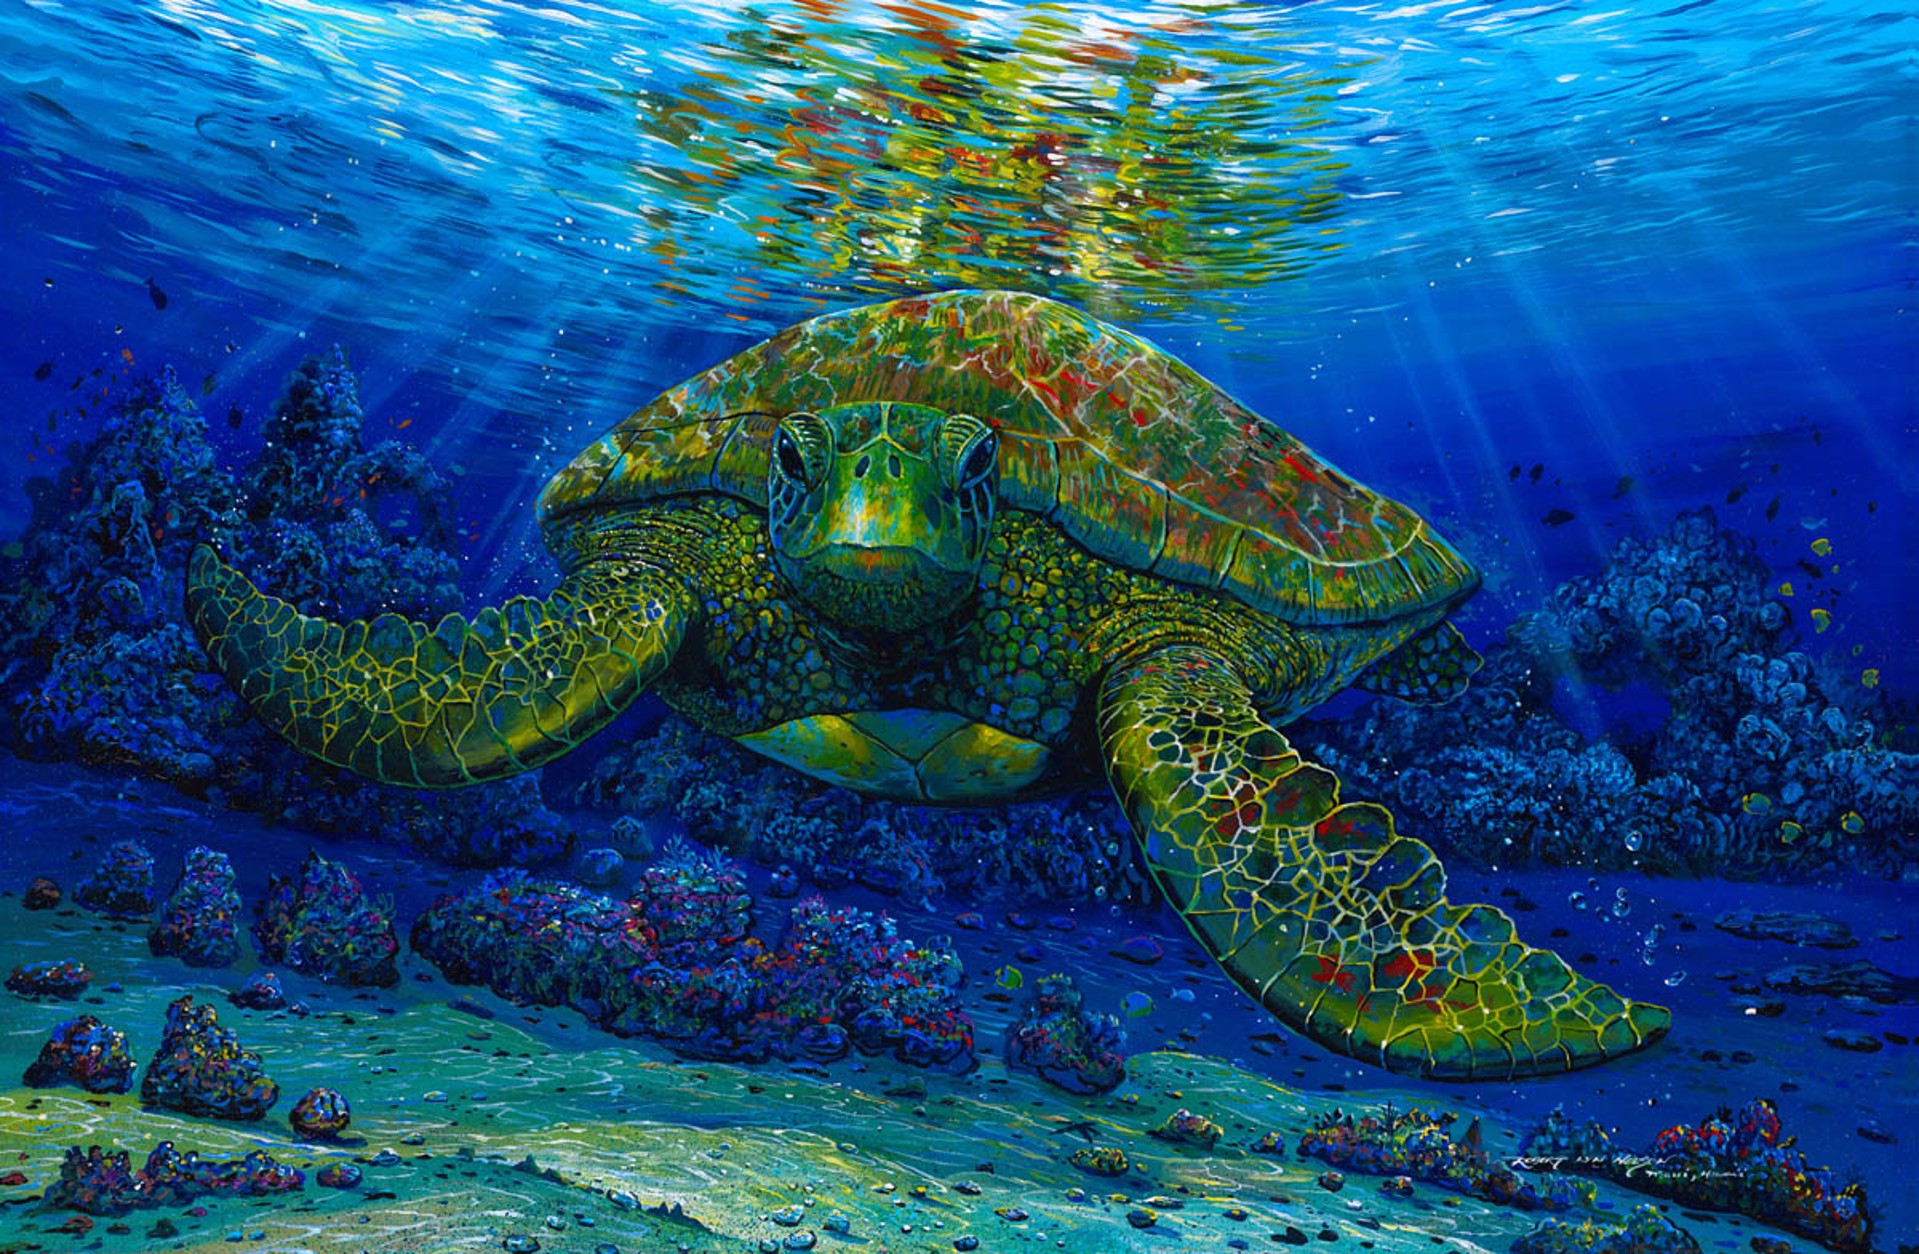 Talk Story with a Turtle by Robert Lyn Nelson